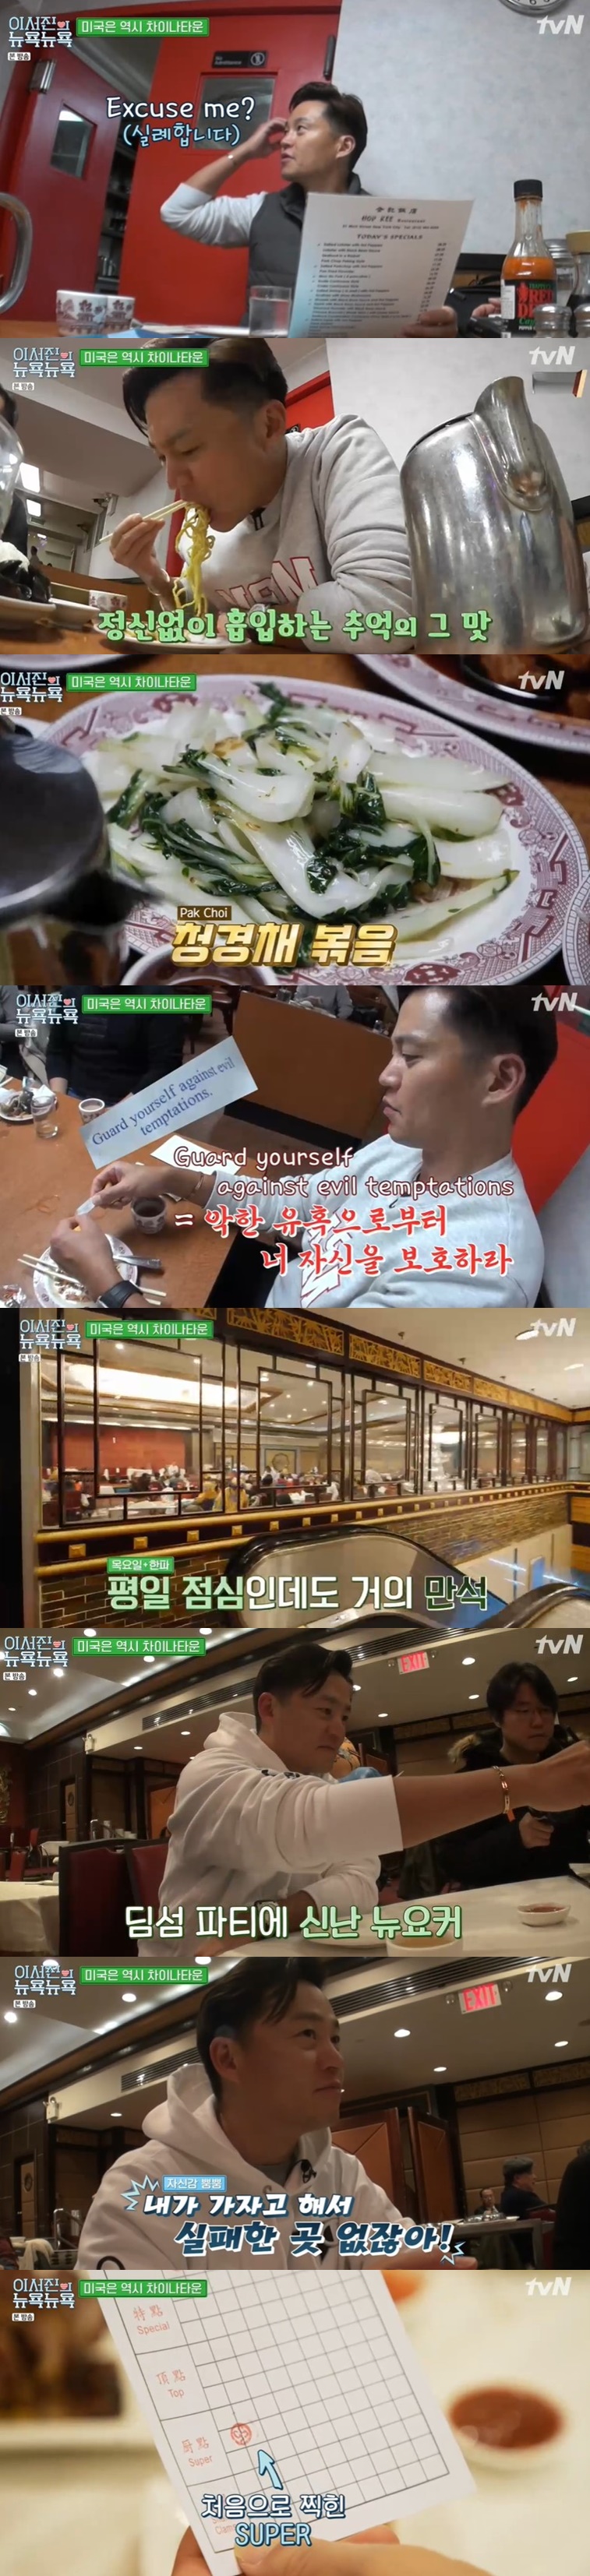 In Friday night, Lee Seung-gi turned into a daily worker at the Tegilarca granosa factory in Beulgyo.Lee Seung-gi visited the Tegilarca granosa factory in Beolgyo at the Friday Friday night of TVN entertainment program.Lee Seung-gi visited the Tegilarca granosa factory in the Factory of Experience Life corner.Lee Seung-gi, who met me PD, laughed when he heard his corner name and said, Is it working because it makes me fit really well with me?Lee Seung-gi, who started his job in earnest, started to shovel away the piled-up Tegilarca granosa.Lee Seung-gi said, I would have done better if I ate Tegilarca granosa.Lee Seung-gi, who shouted out the full line of Tegilarca granosa nets, exclaimed admiration at Man in the Kitchen, made of Tegilarca granosa.Lee Seung-gi, who had breakfast with a talkative boss, was bruised for eating slowly.Lee Seung-gi said, It is because the boss has a lot of words. The boss laughed when he said, Go to bed, there is a lot to say.After breakfast, Lee Seung-gi finished the work of carrying the Tegilarca granosa, which was tied to 20kg, to the truck with an infinite shovel to pump Tegilarca granosa.Lee Seung-gi said, Its funny without any hard feelings.Lee Seung-gi, who arrived at Tegilarca granosa factory, did perfect Tegilarca granosa packaging.Lee Seung-gi, who finally came to eat lunch, said, I did not know Tegilarca granosa came so hard.Lee Seung-gi, who finished his job, said, My labor had no philosophy. I lost in Tegilarca granosa. I will make the philosophy of labor in the second.I will have a philosophy.Jin-kyeong Hong went to Ulsan to get Kim Young-chuls mothers recipe.Jin-kyeong Hong, who entered the house, tasted rice cake with dough mixed with glutinous rice and spicy rice.Jin-kyeong Hong, who ate Kim Young-chuls mothers baked rice cake soup after the baked rice cake snack, said, It has a really sweet smell.With the exclamation Jin-kyeong Hong behind her, Kim Young-chuls mother, who is especially in a hurry, woke up as soon as she ate rice or took the next menu and made the surroundings into a laughing sea.Quickly clearing Man in the Kitchen, my mother released a full-fledged recipe for rice cake soup, first with soup that was cooked with onions, green onions, radish, and kelp without anchovy.The rice cake and rice cake soup are mixed in half to make the dough, and the dough is thinly spread and baked. After that, the prepared broth is filled with rice cake and rice cake soup and the kimchi is sprinkled.He also told me how to catch the fishy taste by burning the sea urchin eggs slightly.Kim Young-chul mother warmed up the surroundings by taking care of Cameras last grilled rice cake soup.In the New Science Country corner, Eun Ji-won, Song Min-ho, and Jang Doyeon talked with Professor Kim Sang-wook about 2020 Future Science.Looking at the members who predicted Future, Kim Sang-wook said, There were many works that predicted as a special point. However, the science fiction from Back to the Future is a work that depicts the world of 2015, but we have not done so yet. Our technologies come from the development of technologies for war, said Kim Sang-wook, who said Future is not predicting but preparing.In the case of McDonald, The Kitchen was important. The Kitchen was created by the person who designed The Kitchen during the war.The microwave was also made by studying laser devices. Everyone has their own vibration cycle, said Kim Sang-wook, who taught us the principle of resonance about microwave ovens. If we set the vibration cycle, the right cycle will have a bigger vibration width.If the microwave is to harm the body, it has to be very strong, but not generally, he added.As for the controversy over the unmanned Toyota, Joo Sang-wook said, In the early days, Toyota was really broken.But the person who was riding in the carriage thought it was Future when he saw Toyota. Toyota would eventually be Future.Future is inevitable. Kim Sang-wook also said that Future is making.Next, in the section of The Wonderful Art Country, Eun Jip, Jang Doyeon, and Song Min-ho saw the most expensive painting in Korea, Space by Kim Hwan-ki.Most of the works are selling expensively, but he is already a small man, but he is recognized for their value late, Yang said. In fact, he lived hard in his lifetime.At that time, the work was sold only at a general price. It is a shame.The worlds most expensive painting is said to be Salvator Mundi, a Da Vinci code that won 500 billion won.In fact, this work was a forgery that was sold for 120,000 won, Yang said.But when I restored it, Da Vincis genuine product appeared. In the end, the person who bought it for 120,000 won sold it for 500 billion won.Professor Yang Jung-moo said, I think it is the life of painting itself.Kyonggi, a match between Jejus Southeast Cho Judo, was drawn at the section of the Cheerful Hall of Justice.The best people elementary school player was nervous ahead of Judo Kyonggi.In the first Kyonggi, The Best People player was coached to leave Kyonggi; next, the opponents received the map twice in a row.Fortunately, the opponent received three times of guidance for a passive attack. The best people, who finished the match and relaxed, shed tears again and made Han Jun Hee and Park Ji Yoon sad.The youngest performer, nine-year-old Kang Min-gu, also wiped tears from the tension ahead of the match, and the orange band, Kang Min-gu, was more nervous when he saw a black band and a one-year-old opponent.The same team Friends cheered Choi Min-gu in the stands.Choi Min was not pushed by his opponents brother as if he had cried when he entered the match.Choi Min-gu, who was reluctant to fix his clothes even when his uniform was stripped off, challenged again, but was overwhelmed by his opponent.After all, Choi Min-gu, who returned to Kochi in tears, encouraged Kochi to good job. I said I should not cry.Even with the encouragement of his brothers, Choi Min did not easily stop tears of regret.Choi Min-gu said, I thought of my mother the most, when I asked who was the most reminded of me during the match.Choi Min-gu, who came to the relay, said, My head was sick. Kochi said, It is the psychology of the children to come out and grab anything if I originally lose.The best people went up to the quarterfinals, gave half from the first edition to the opponent, and then gave half to the next edition, which made the best people tearful.The best people came to the relay and comforted the friends.The best people said, Im sorry for you, sir. I didnt play as you said. Ill do better next time.Lee Seo-jin visited a Chinese restaurant in Chinatown, New York City, and stopped at a dim sum restaurant and crab restaurant at the New York City New York City corner.As soon as he arrived at New York City, Lee Seo-jin, who was looking for a crab dish he had eaten in the past, arrived at a Chinese house and tasted pork ribs, fried seafood, and crab dishes.Lee Seo-jin said, I really like to eat this house, but it is the same as cleaning the bowl. Seven adults ate and 150,000 expeditions came out.Its still cheap.Lee Seo-jin, who went to lunch the next day, once again found Chinatown; the dim sum restaurant introduced by Lee Seo-jin was filled with people even at lunchtime.Lee Seo-jin, who had tasted different dim sums on each cart, expressed his pride in the Old New Yorker, saying, I have lived here and know the restaurant.Lee Seo-jin, who confirmed that he ate a lot of food from 7 people and came out about 150,000 won, looked proud.